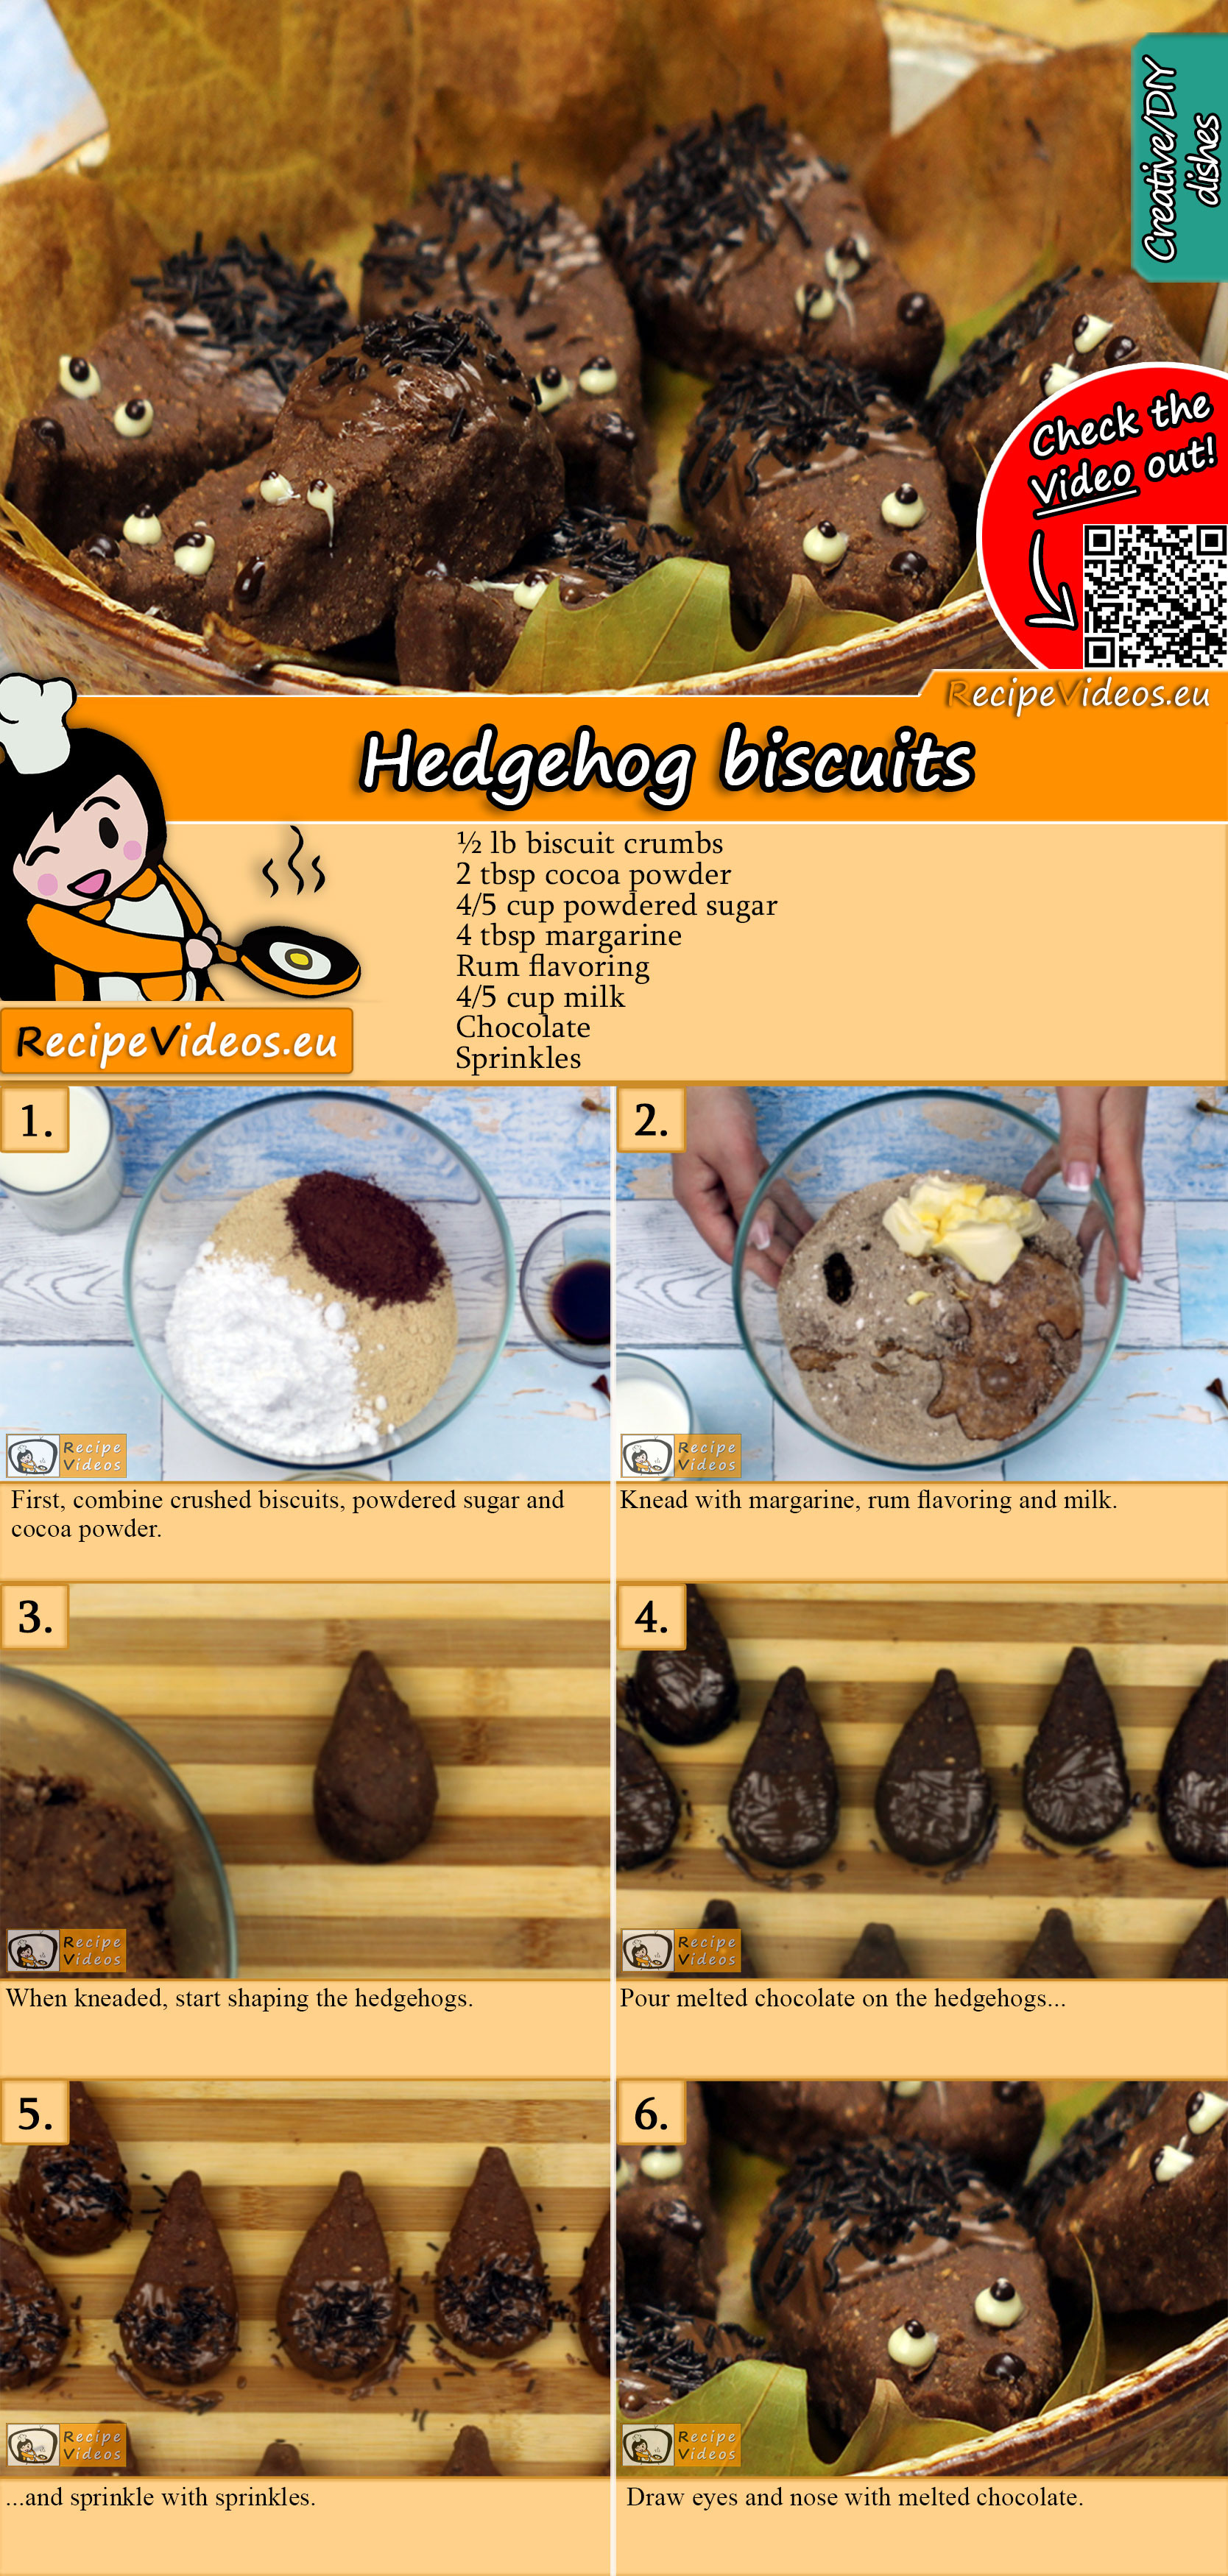 Hedgehog biscuits recipe with video